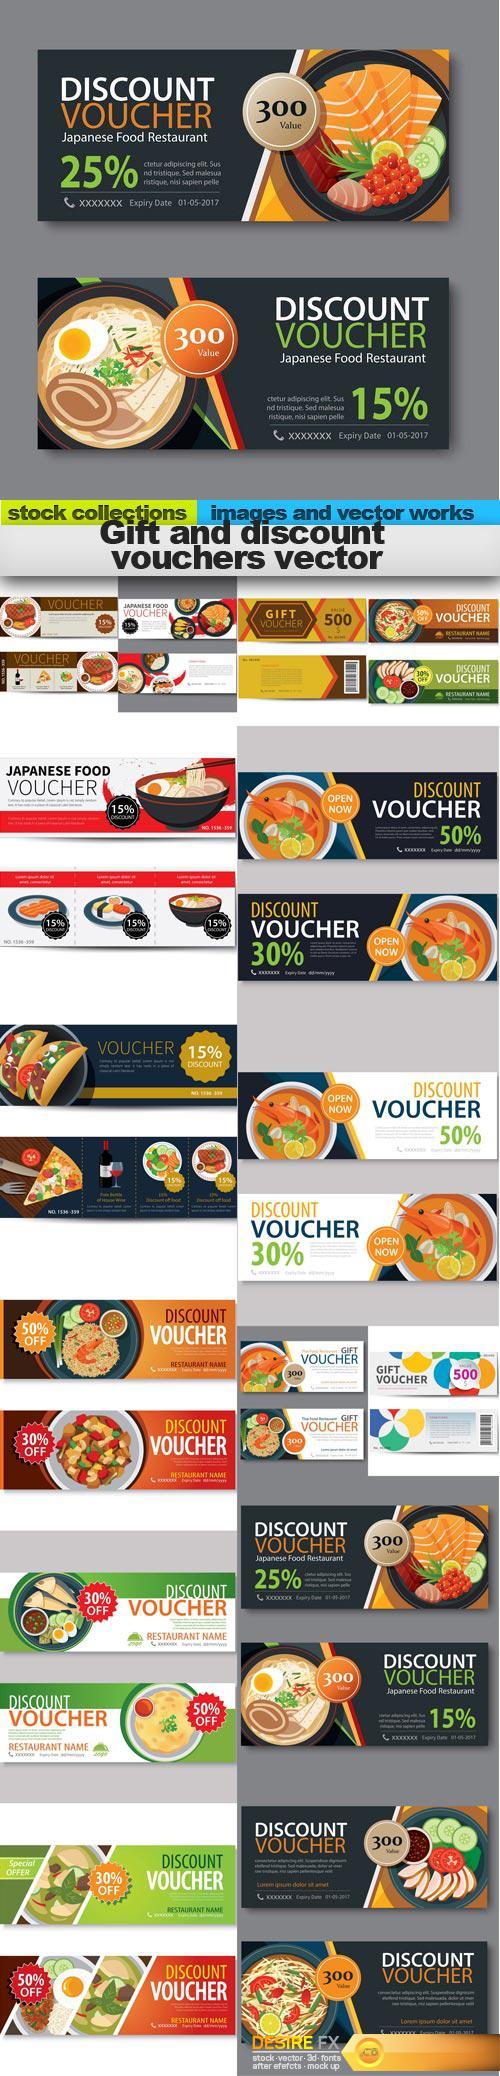 Gift and discount vouchers vector, 15 x EPS